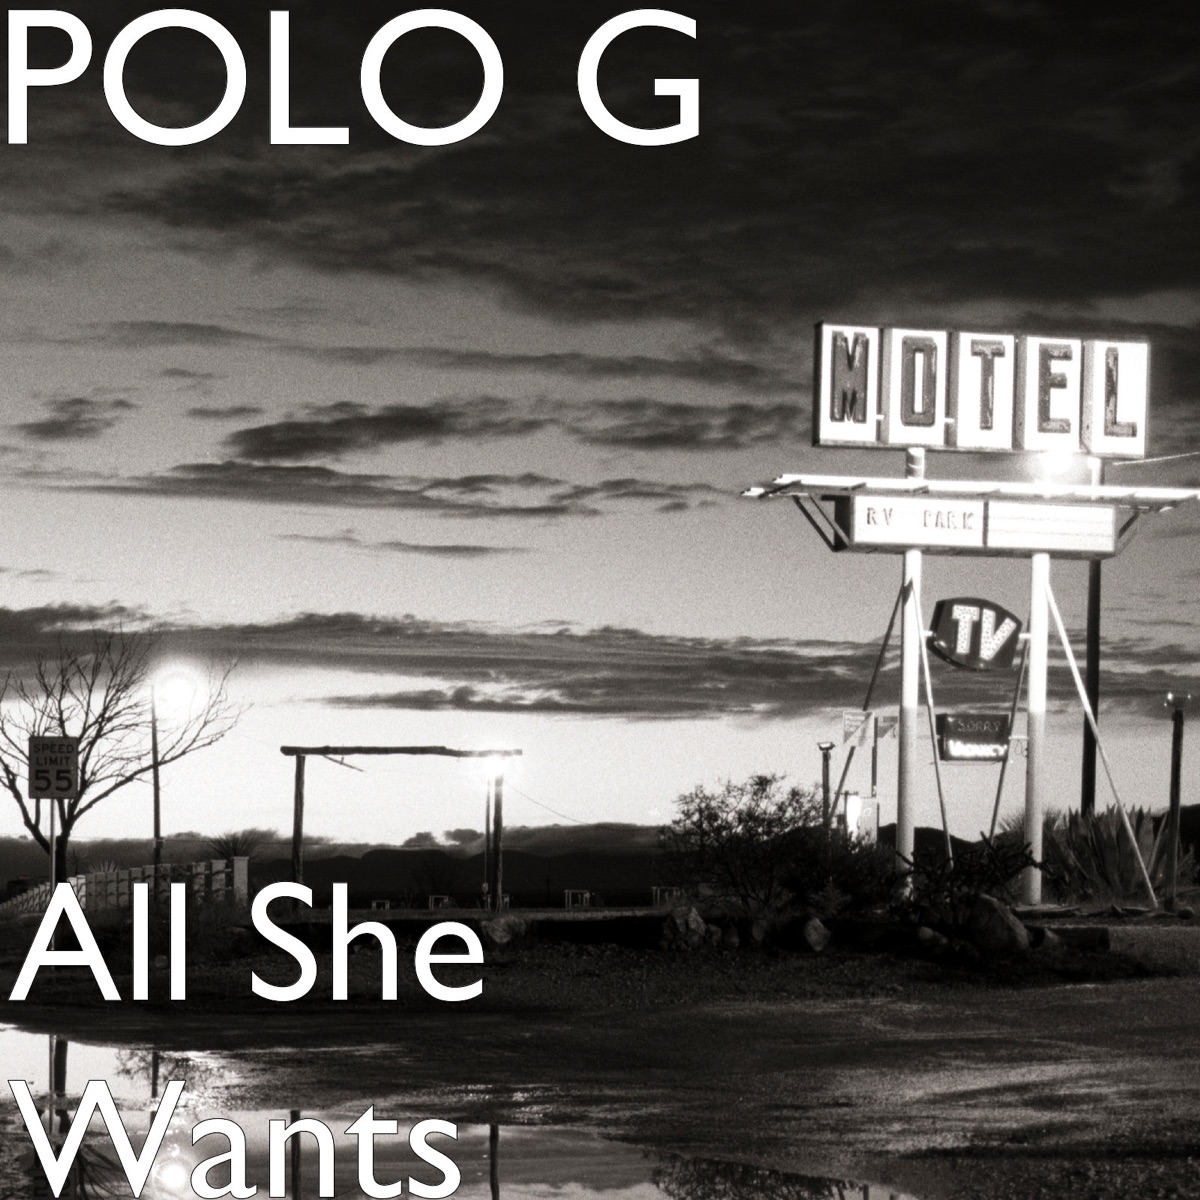 Gang WithMe - Single - Album by Polo G - Apple Music